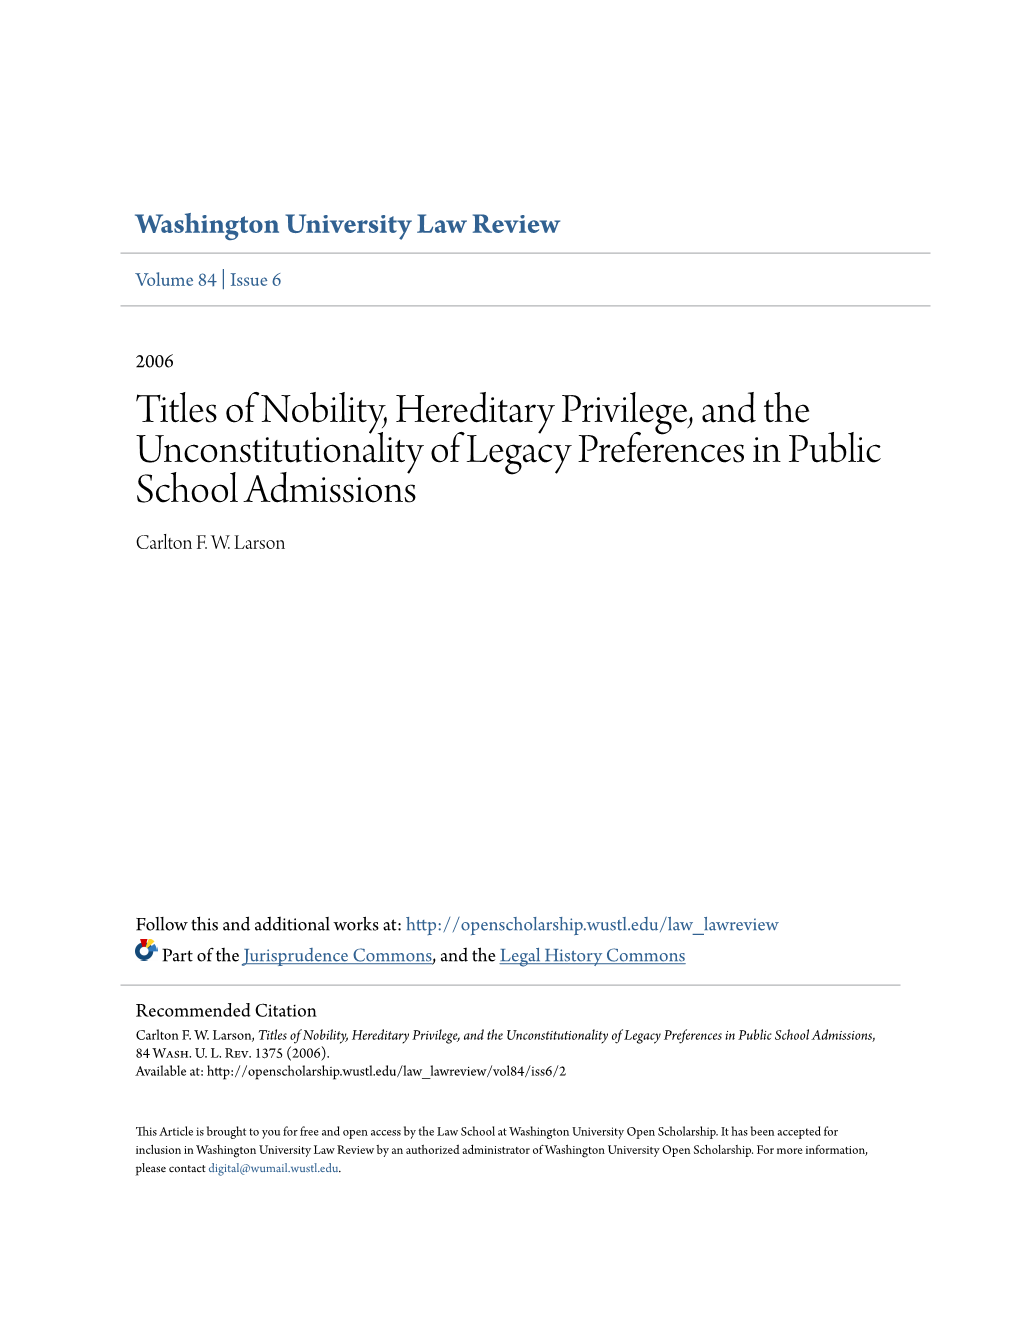 Titles of Nobility, Hereditary Privilege, and the Unconstitutionality of Legacy Preferences in Public School Admissions Carlton F